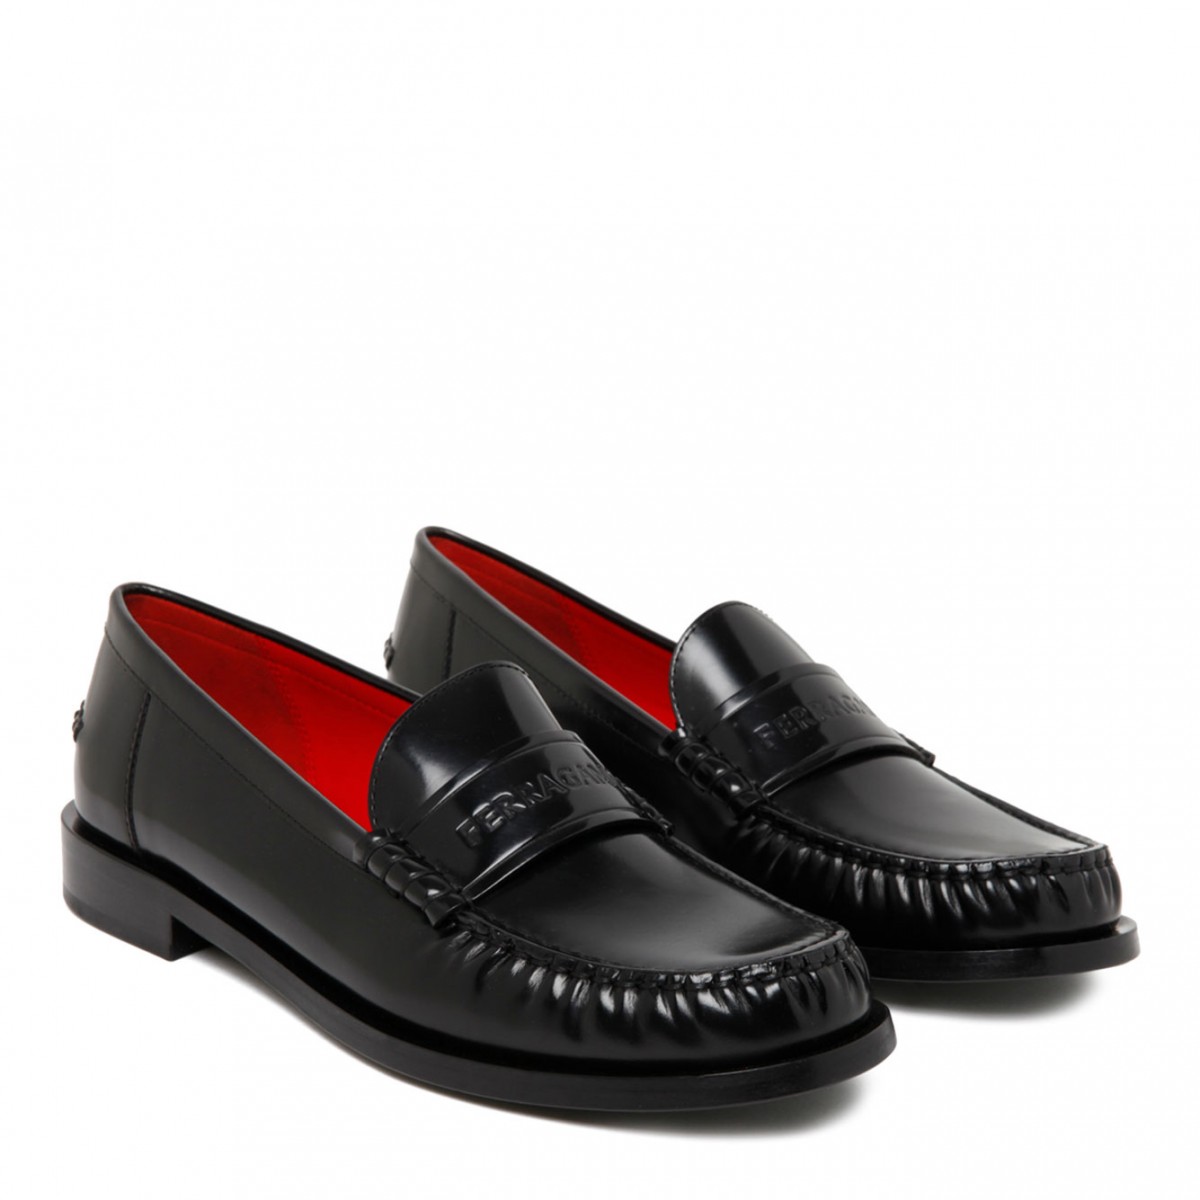 Black Calf Leather Debossed Logo Loafers| COLOGNESE 1882